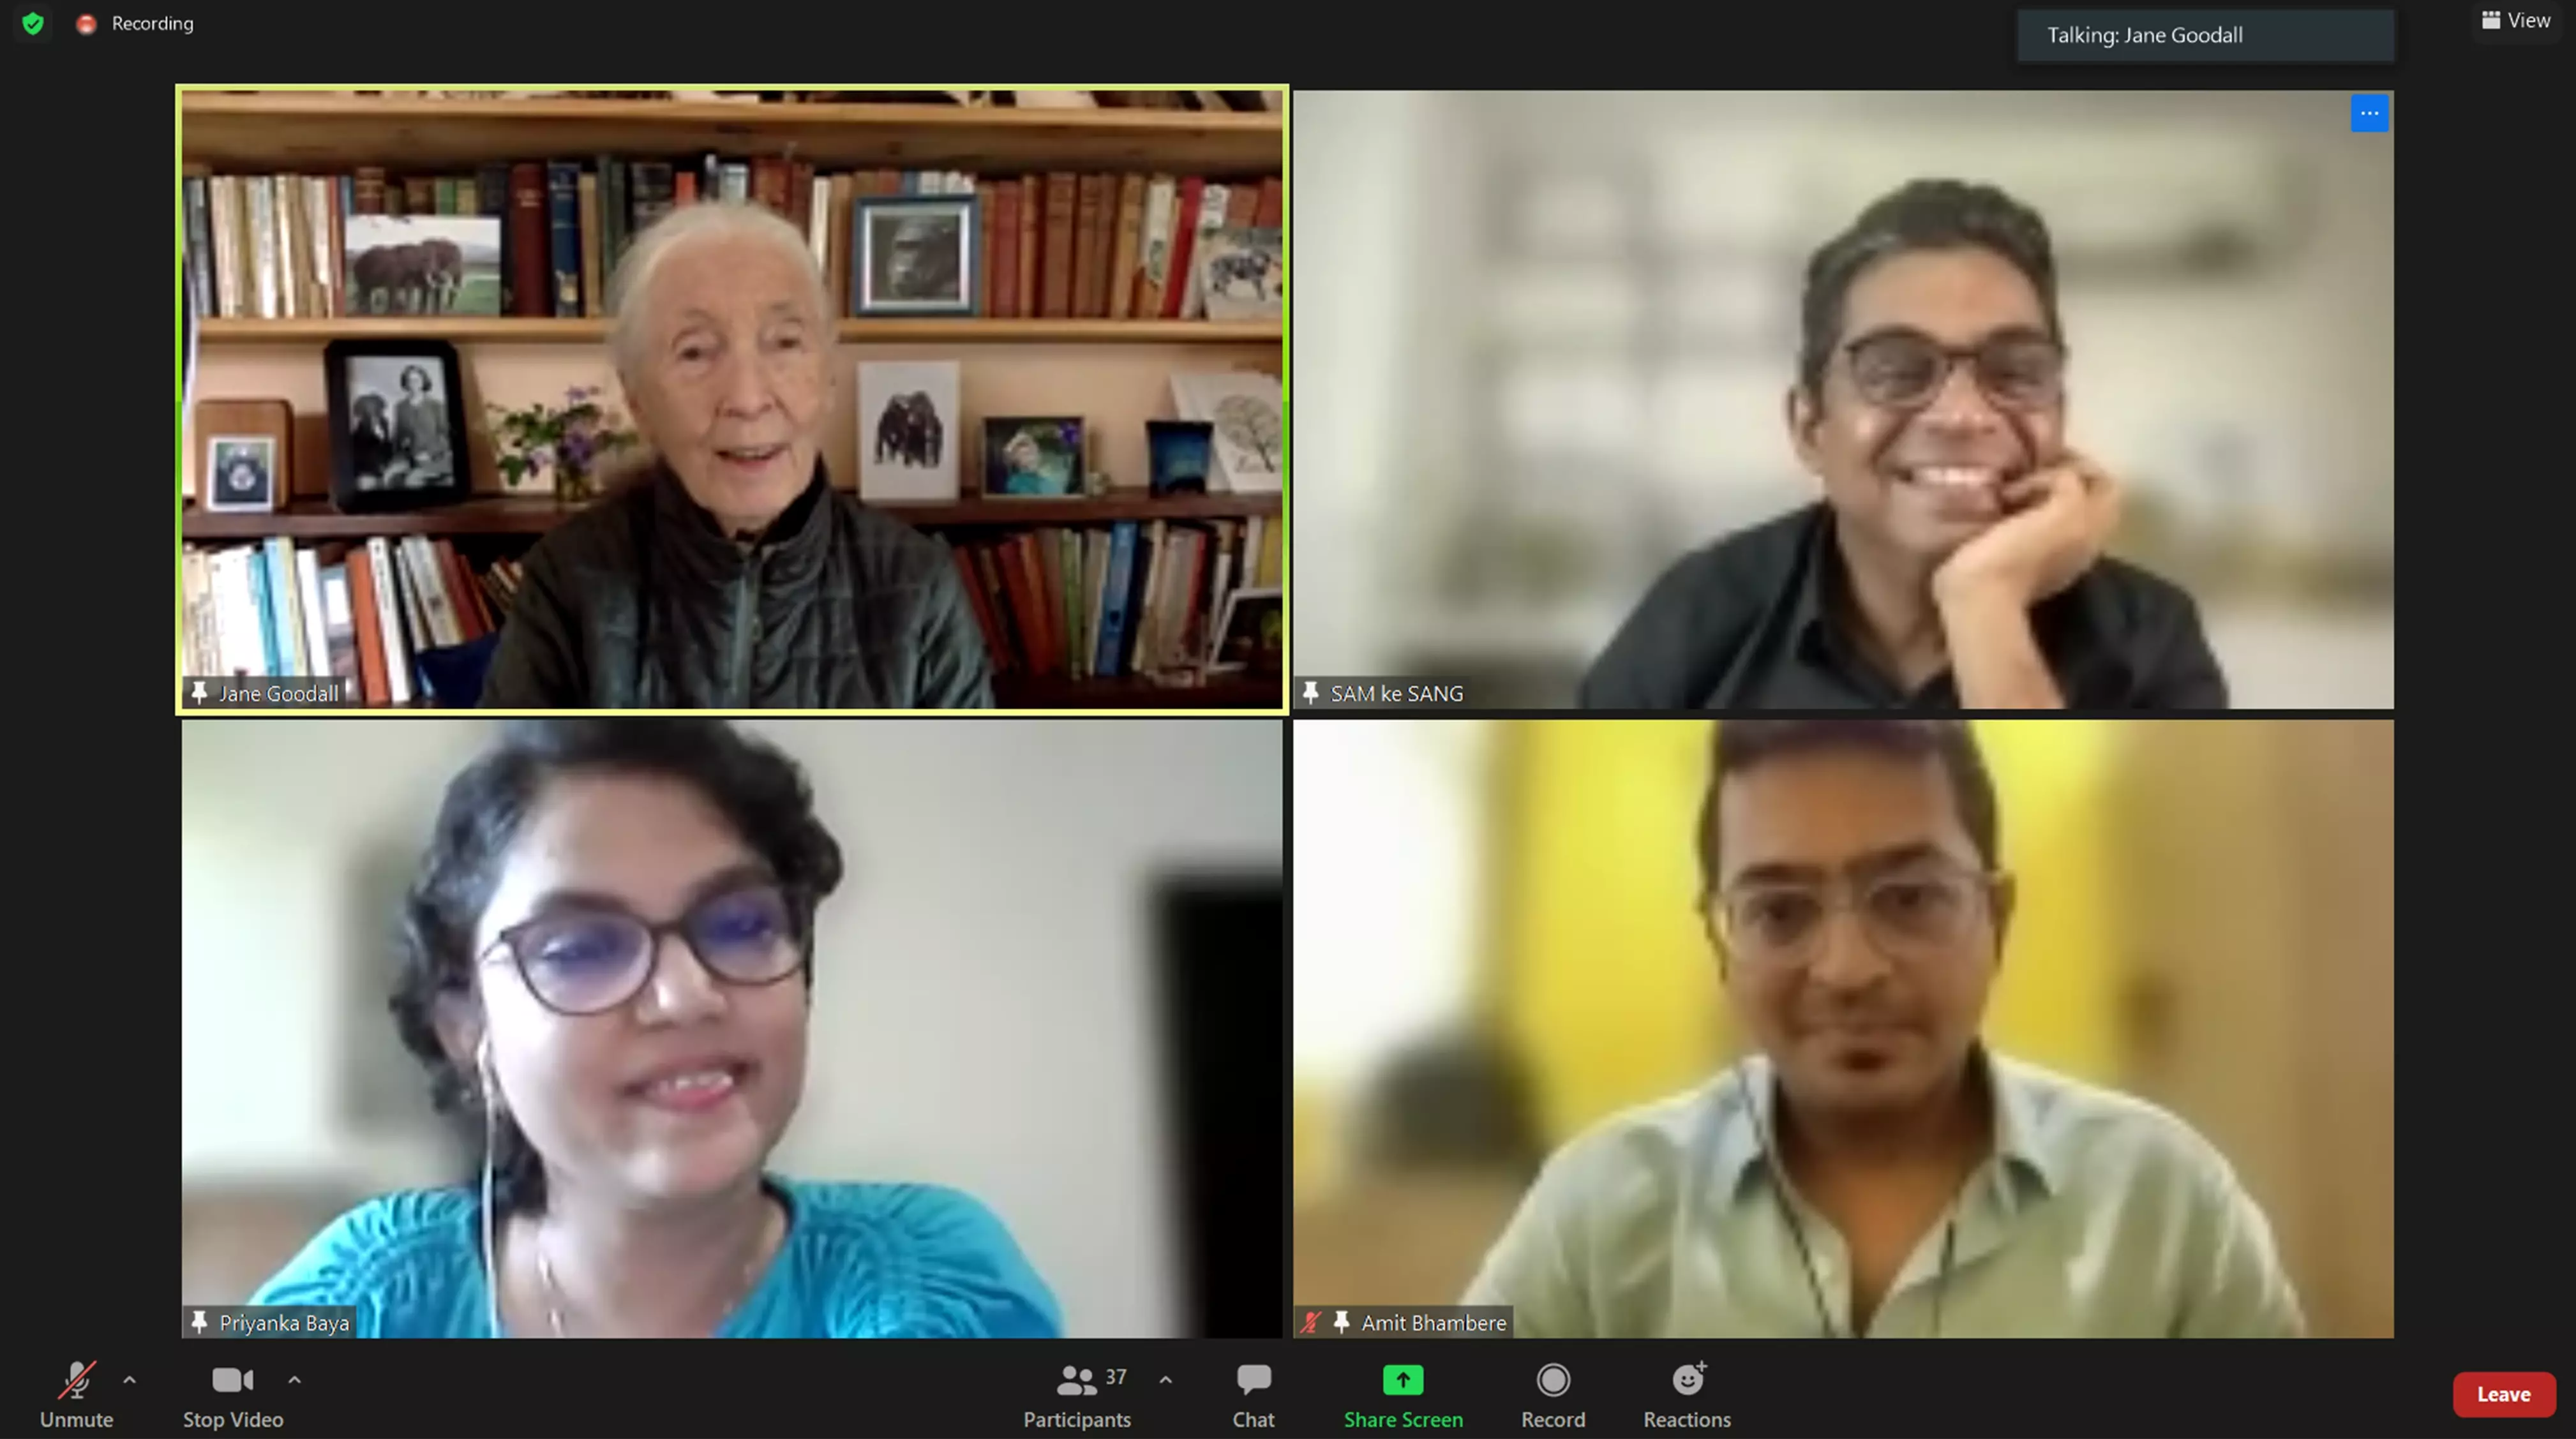 Team LY in conversation with Jane Goodall